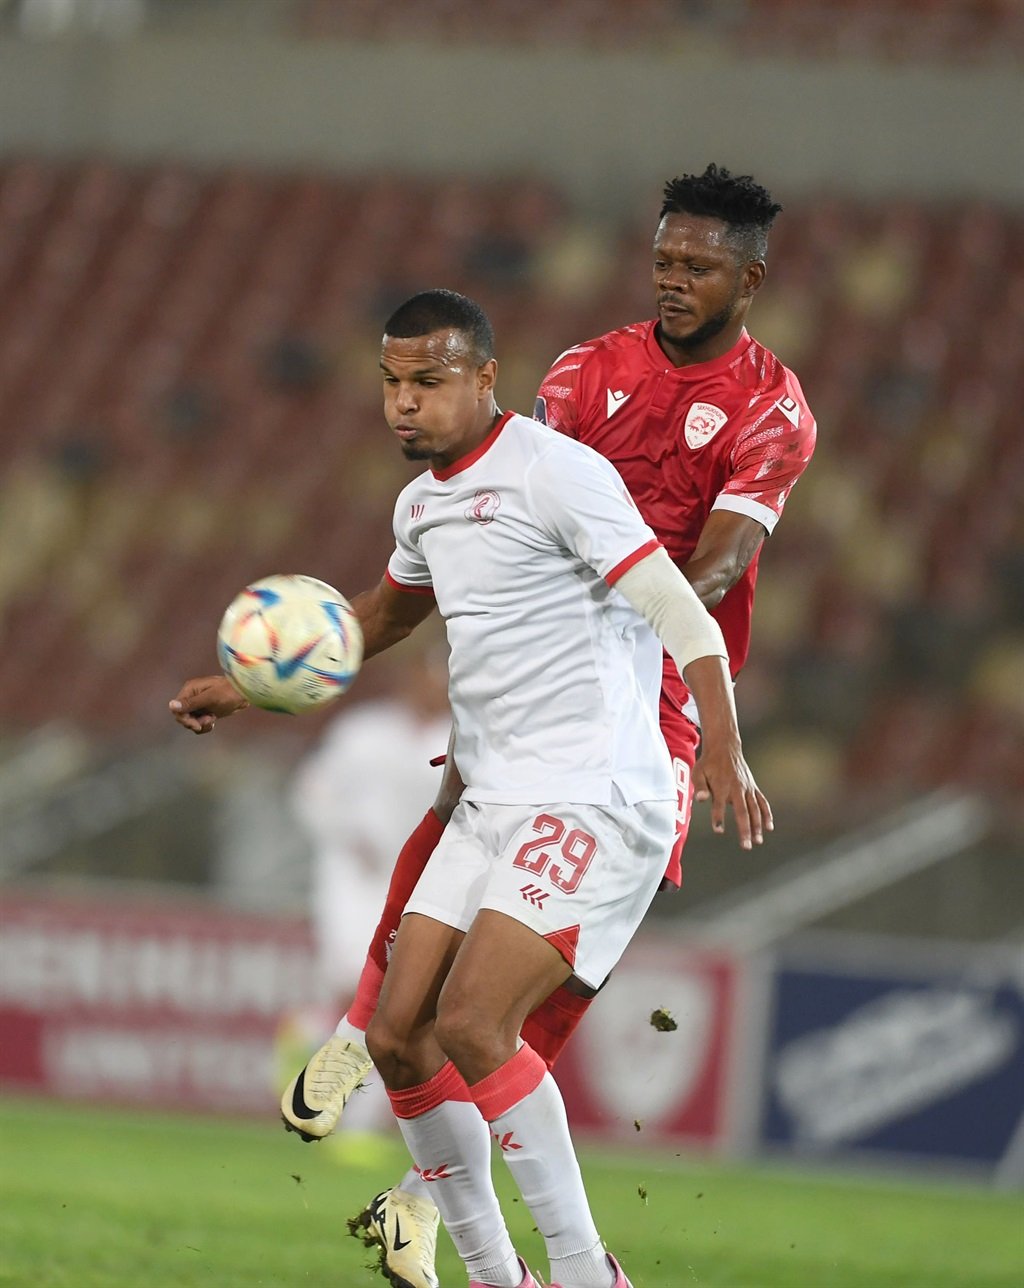 POLOKWANE, SOUTH AFRICA - APRIL 20: Ashley Cupido of Cape Town Spurs and Tresor Tshibwabwa of Sekhukhune United during the DStv Premiership match between Sekhukhune United and Cape Town Spurs at Peter Mokaba Stadium on April 20, 2024 in Polokwane, South Africa. (Photo by Philip Maeta/Gallo Images)